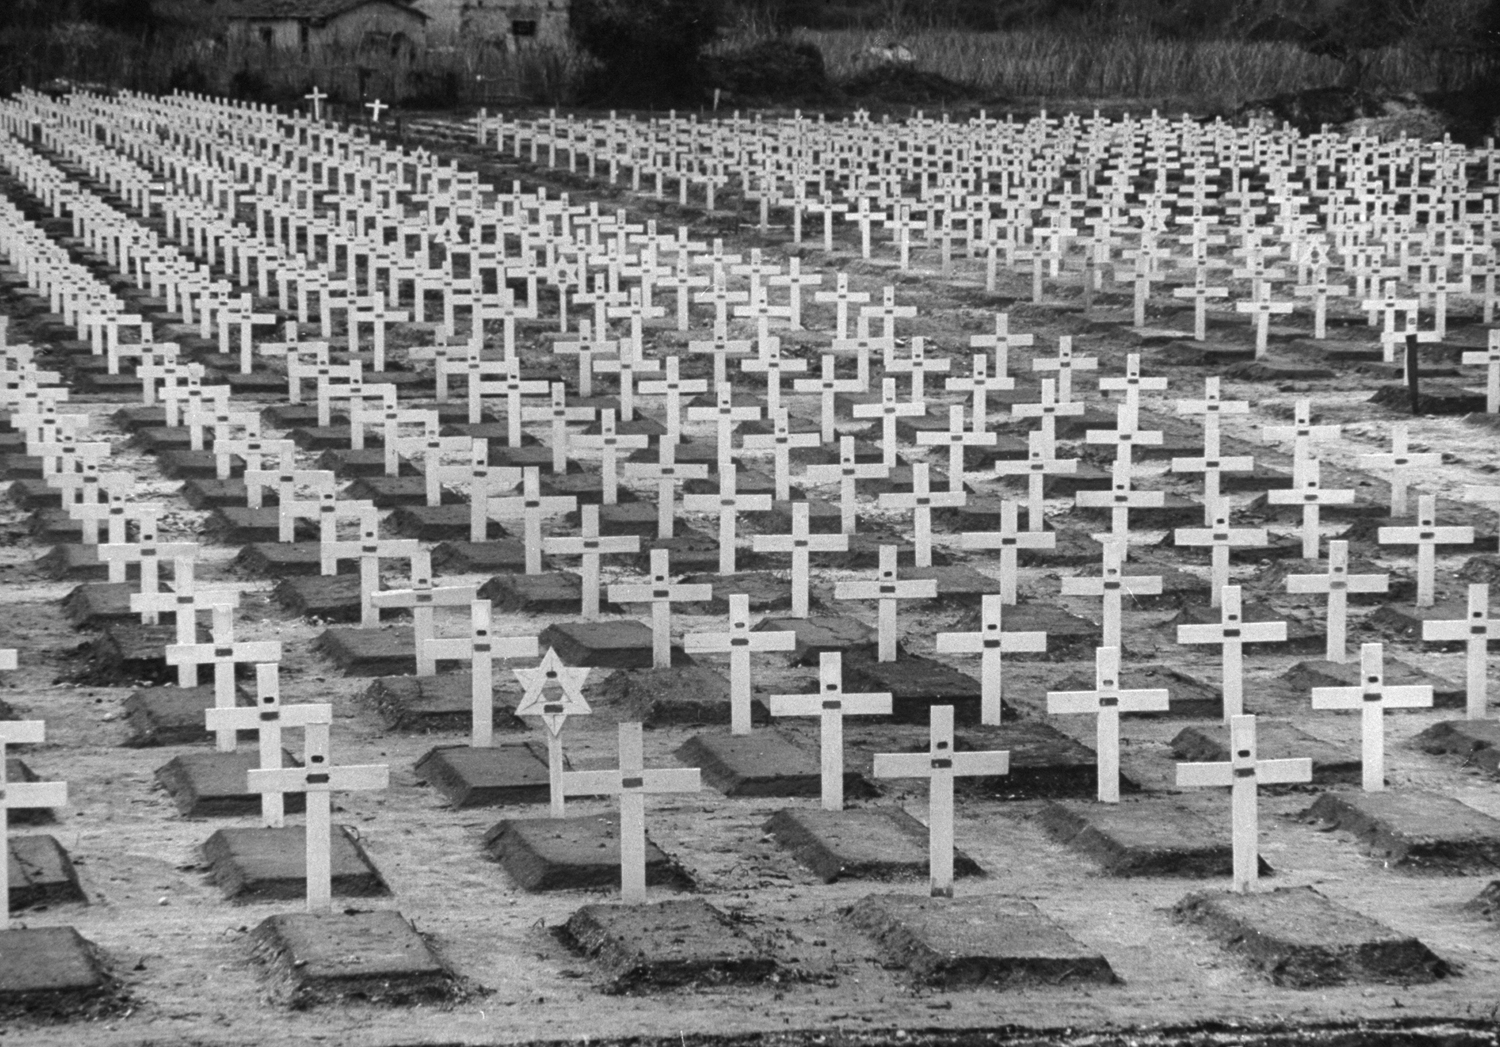 Anzio: American cemetery on the beachhead is neat and bare. Little metal tags on white crosses bear name and rank of the dead. An occasional Star of David stands among the rows of crosses placed there by U.S. Army's conscientious Graves Registration Service.